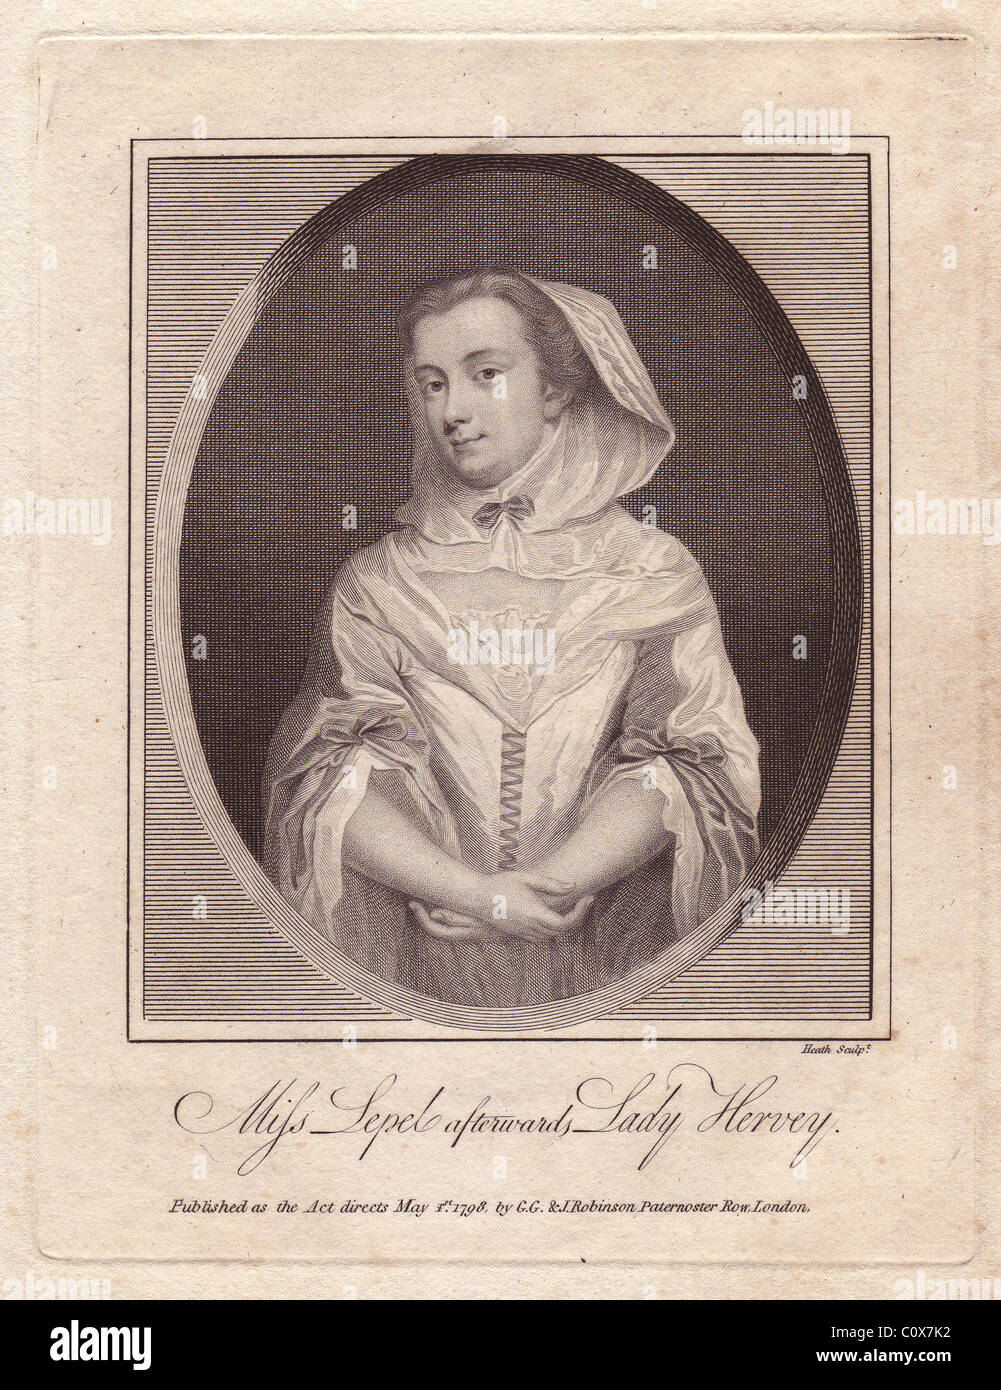 Miss Mary Lepel (1700-1768), maid of honour to the court of George I, a famous beauty and conversationalist, later Lady Hervey. Stock Photo